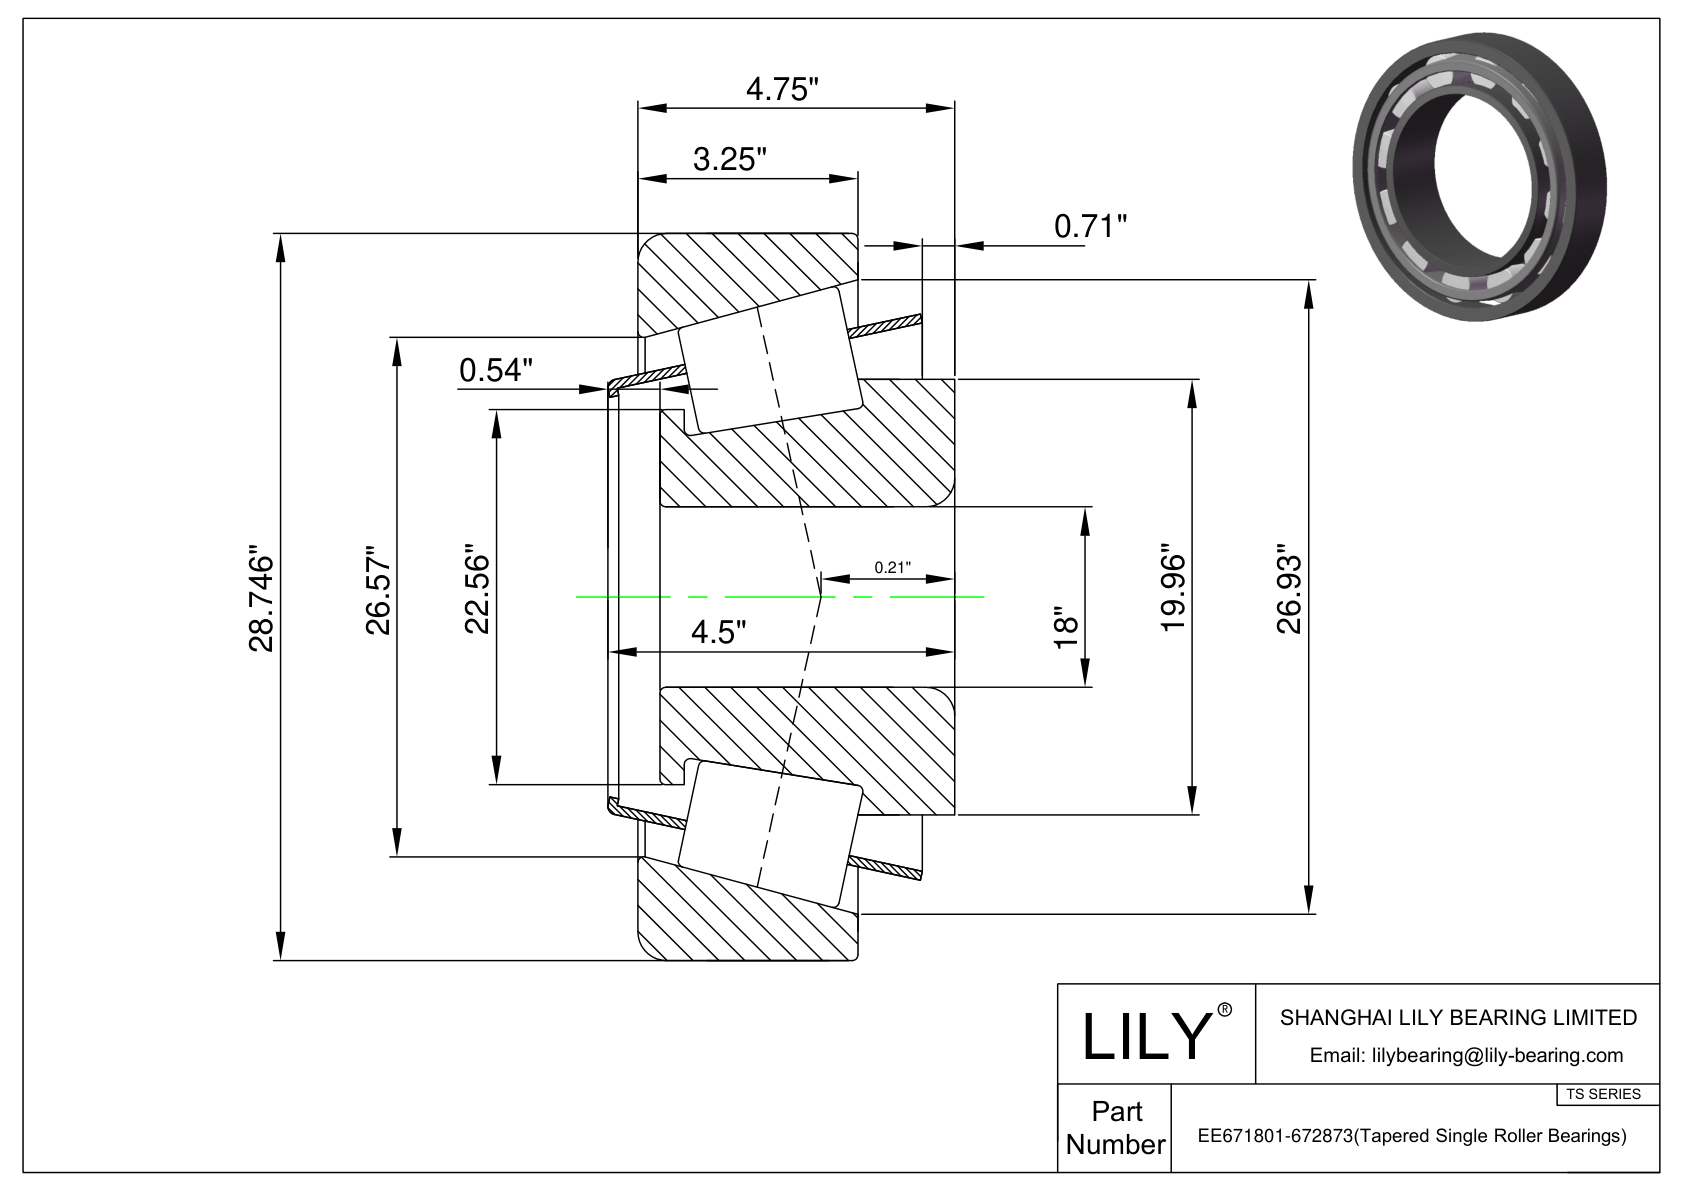 EE671801-672873 TS (Tapered Single Roller Bearings) (Imperial) cad drawing